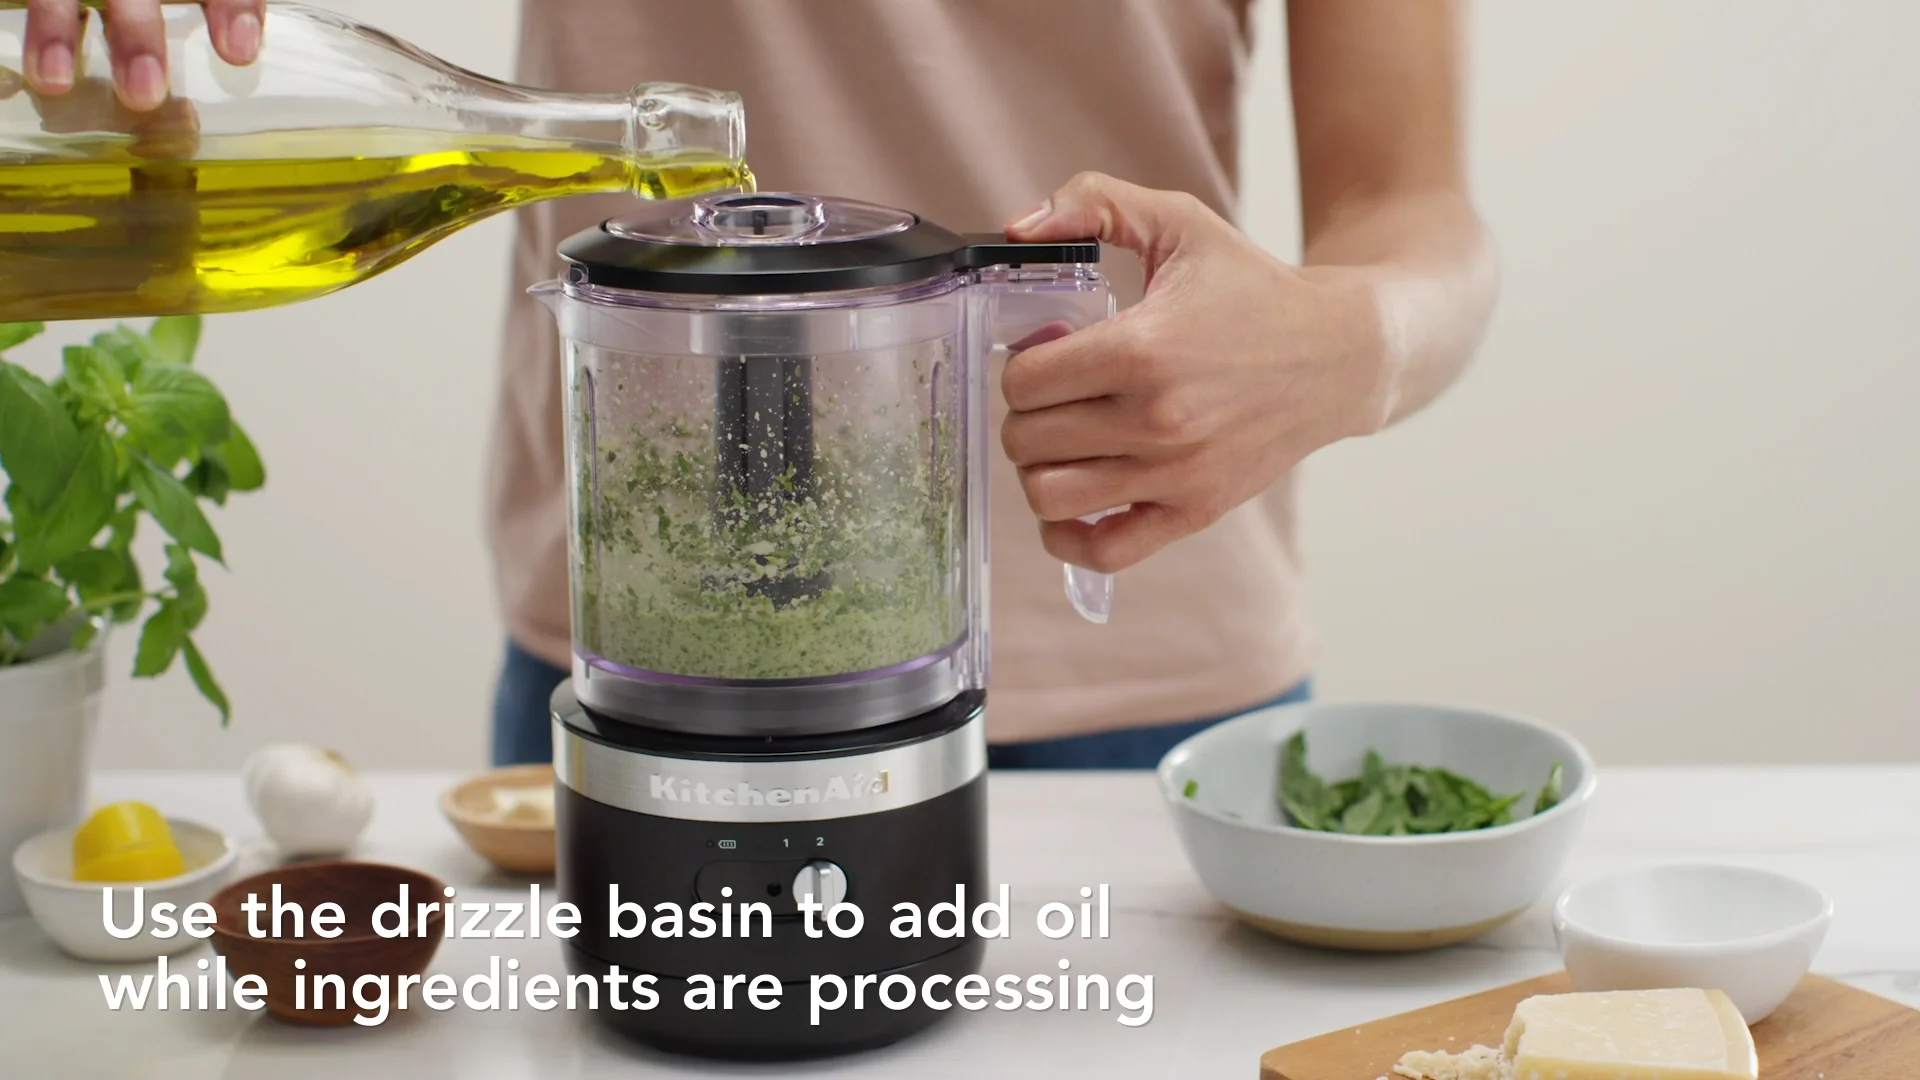 How to use the cordless food chopper video from KitchenAid on Vimeo